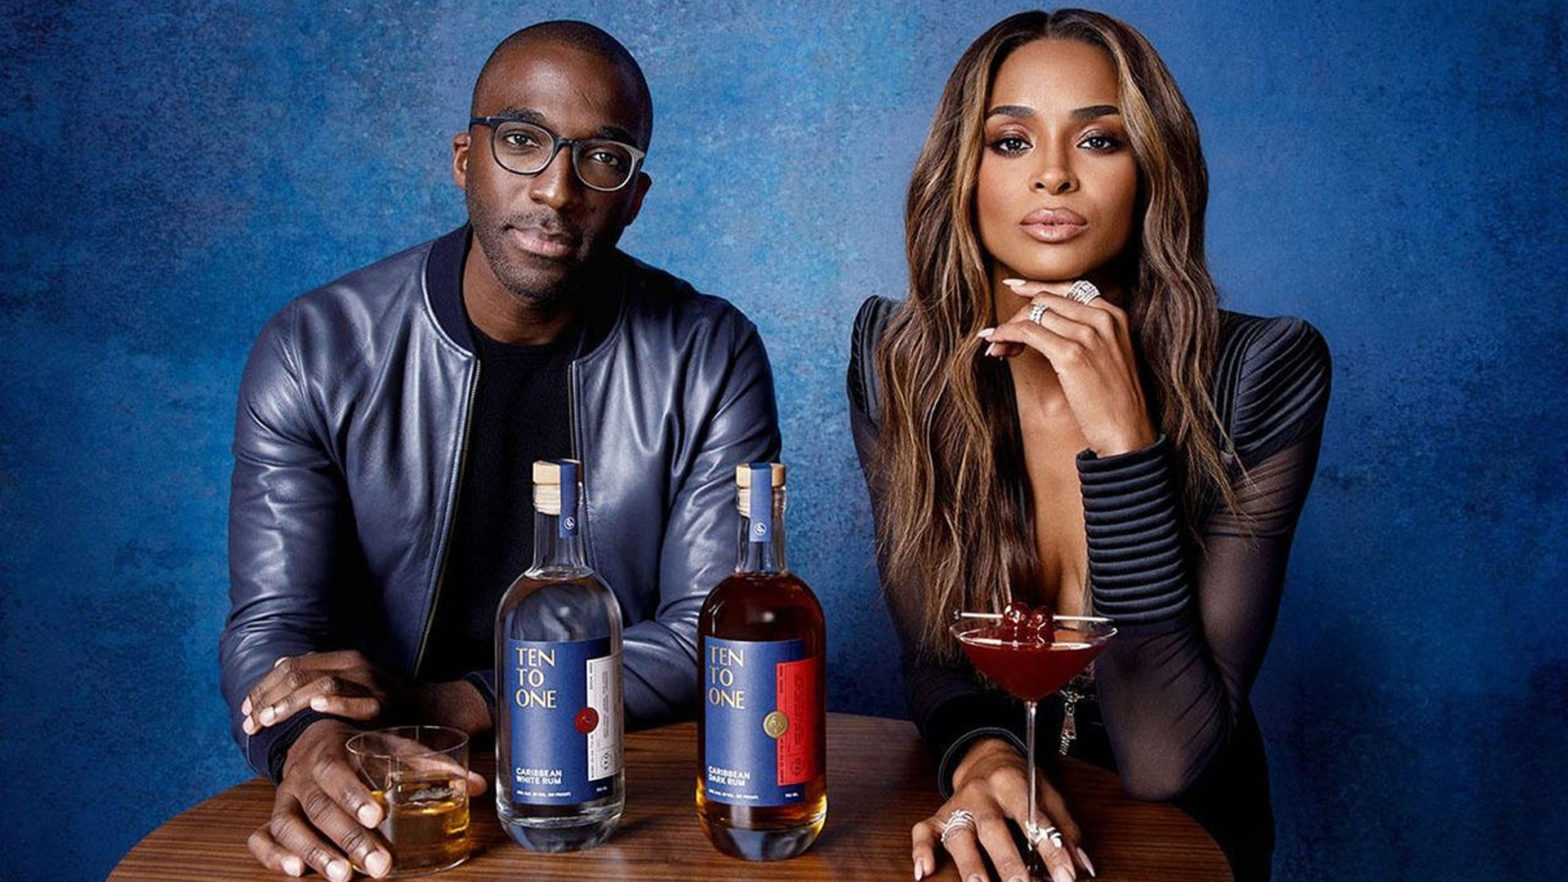 Ciara Invests In Ten To One Rum, Becomes Co-Owner Alongside Trinidad-Born Founder Marc Farrell